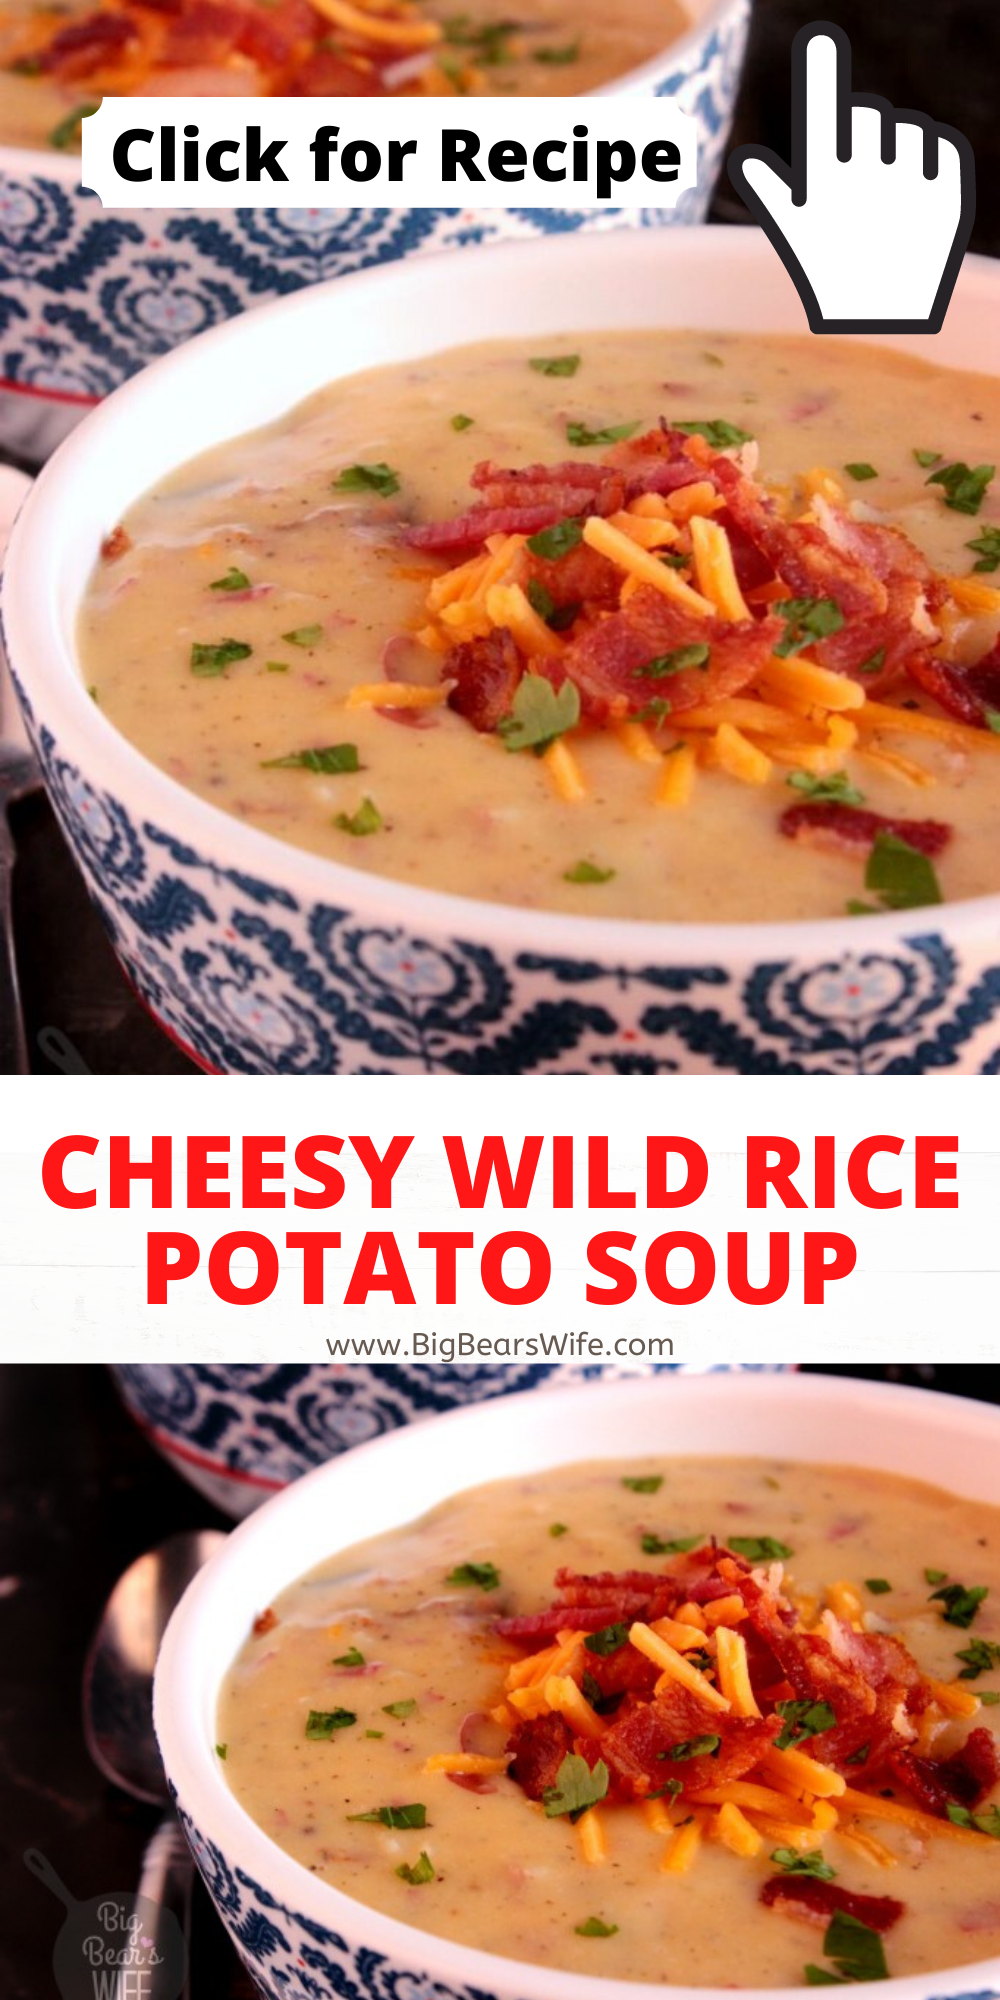 This Cheesy Wild Rice Potato Soup is full of cheddar cheese, crispy bacon, wild rice with a homemade red skin potato soup base! via @bigbearswife